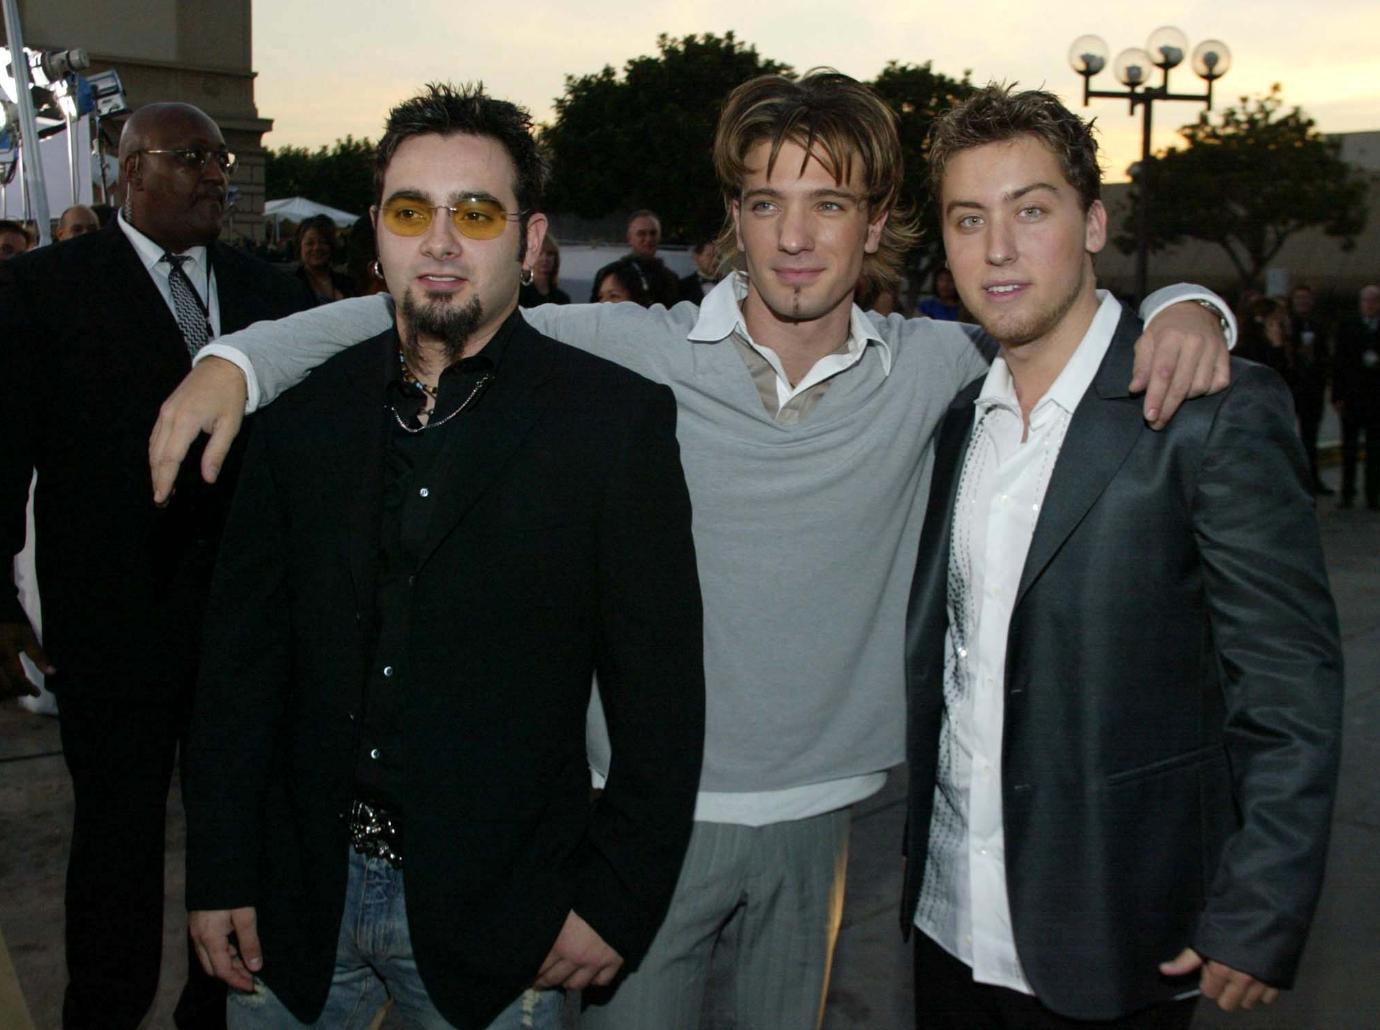 NSYNC reunite at MTV VMAs for the first time in 10 years